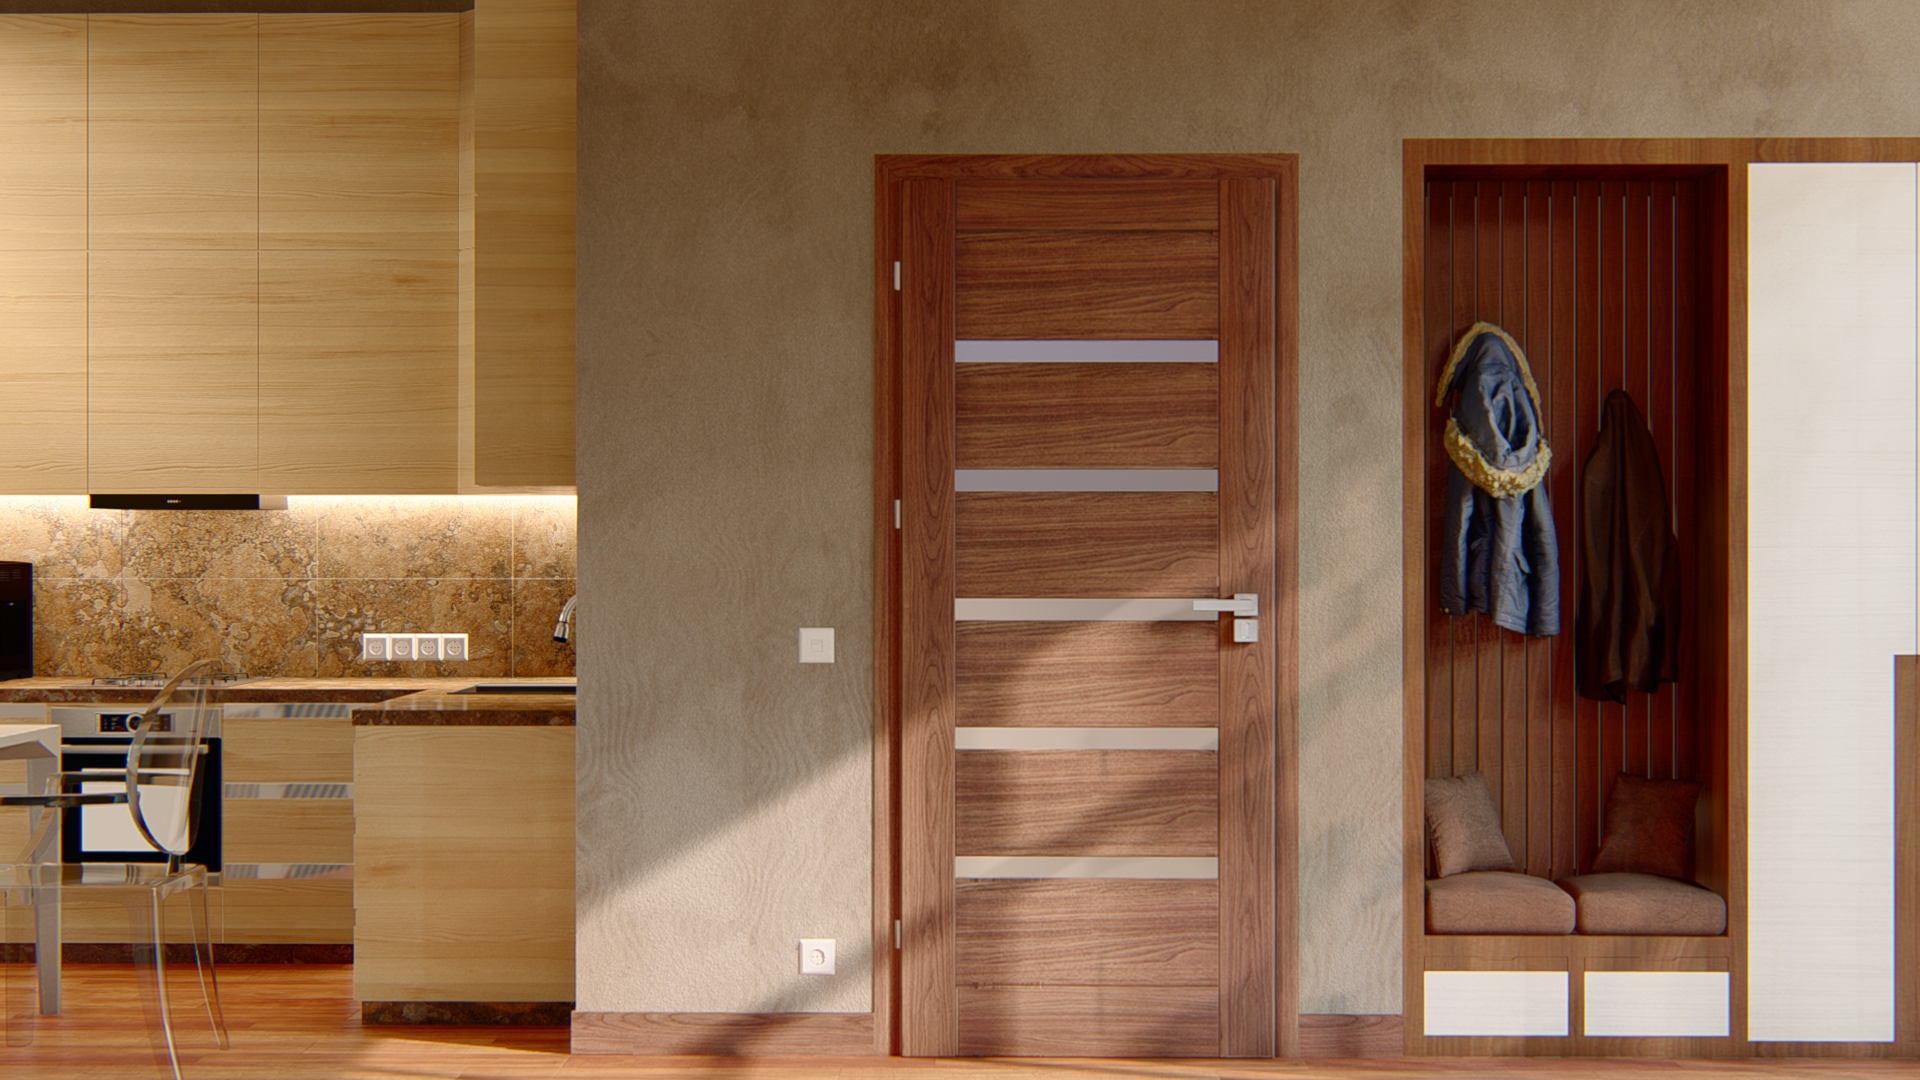 Folded interior doors and foldless – what’s the difference?